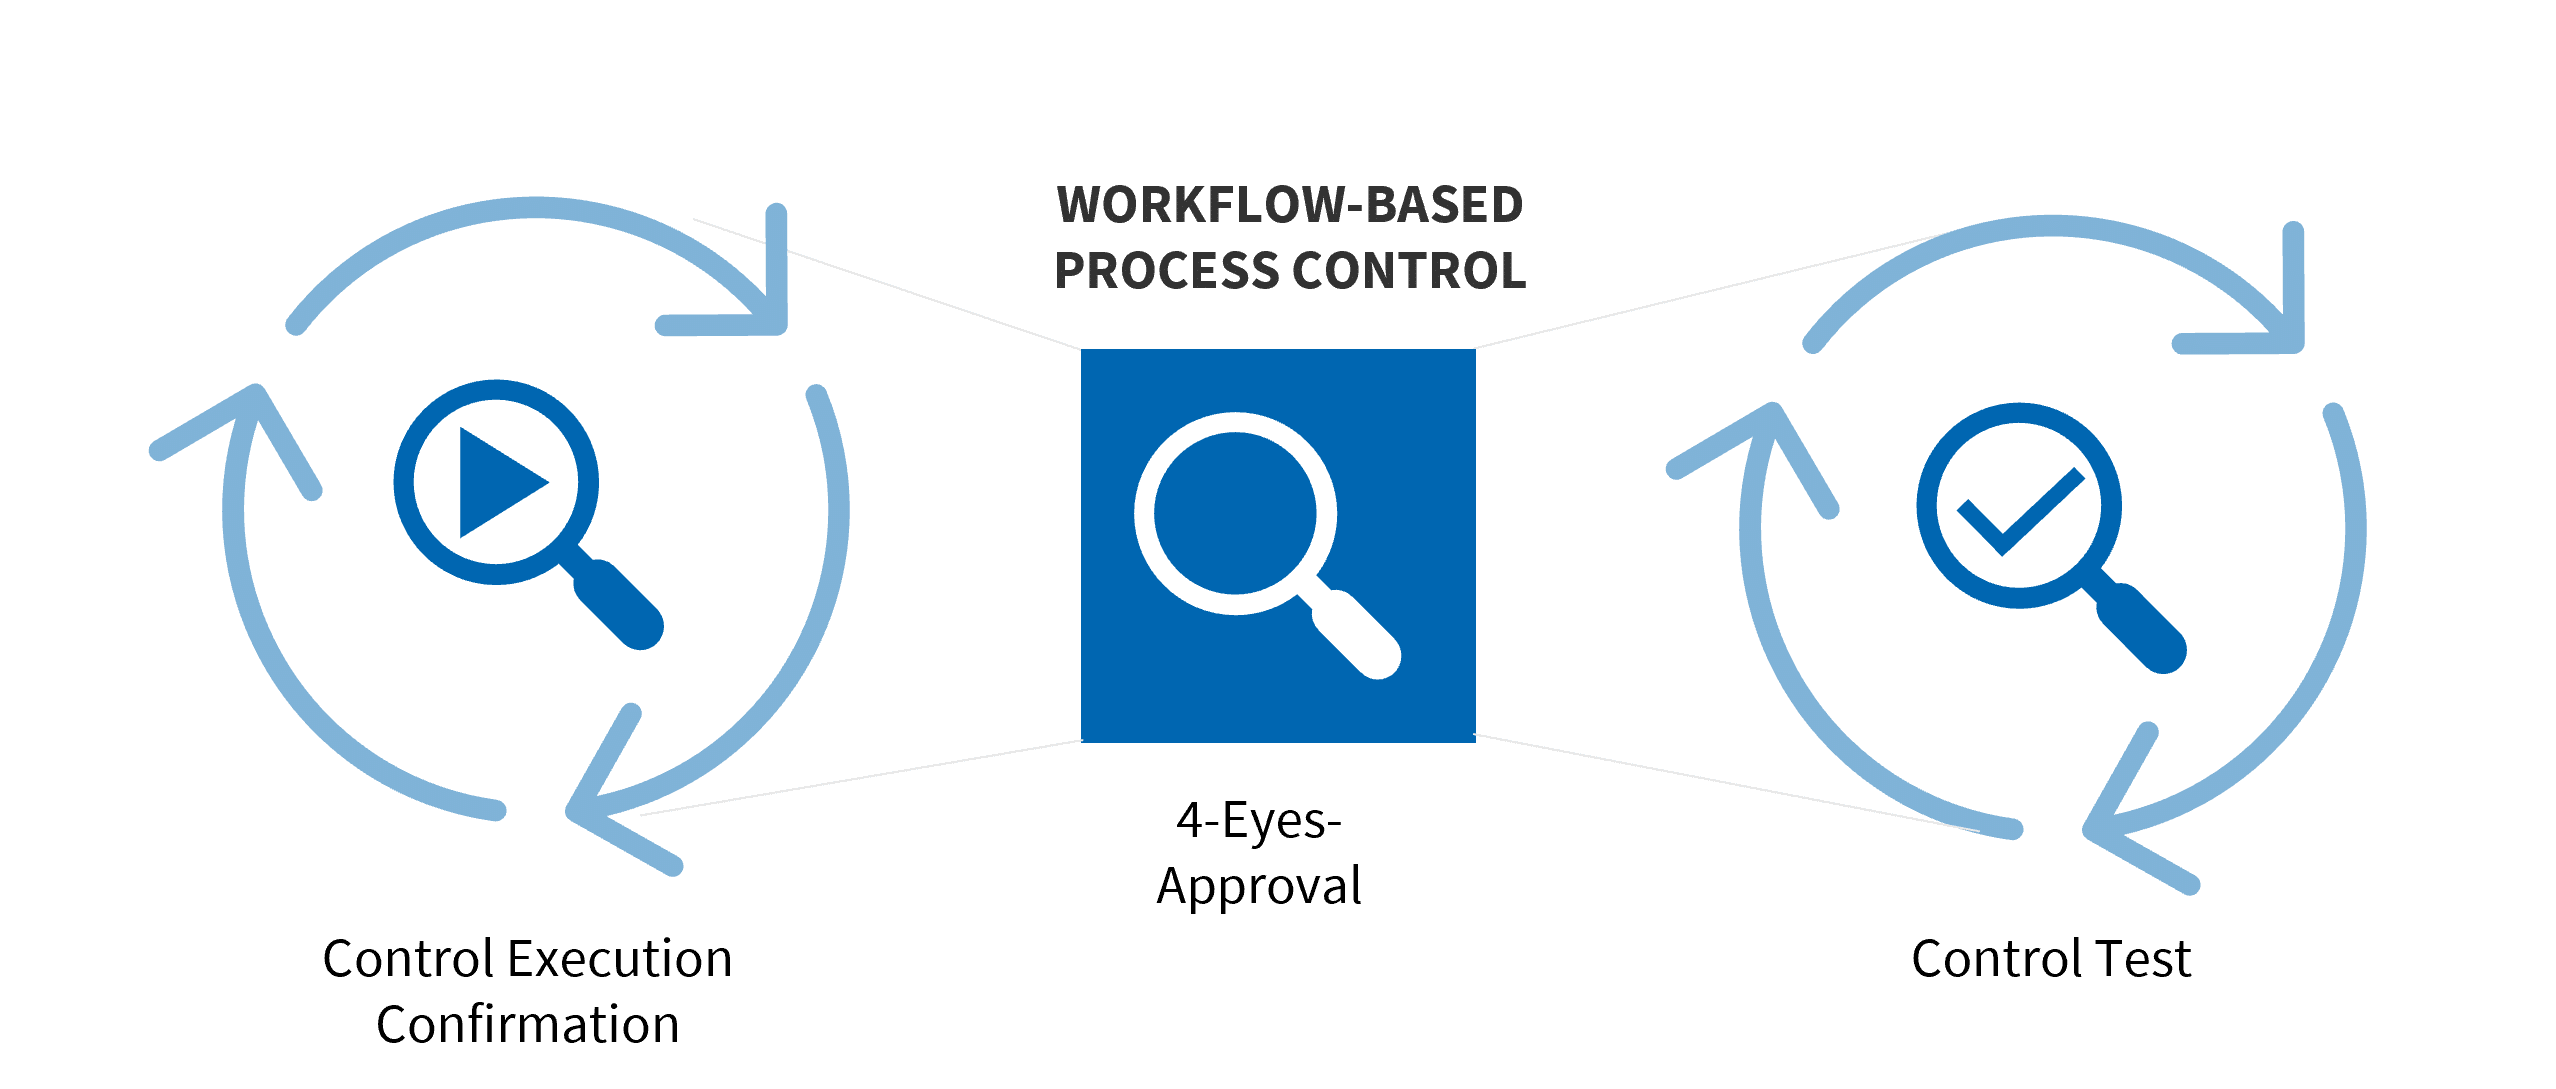 Graphic showing how workflow-based process control works